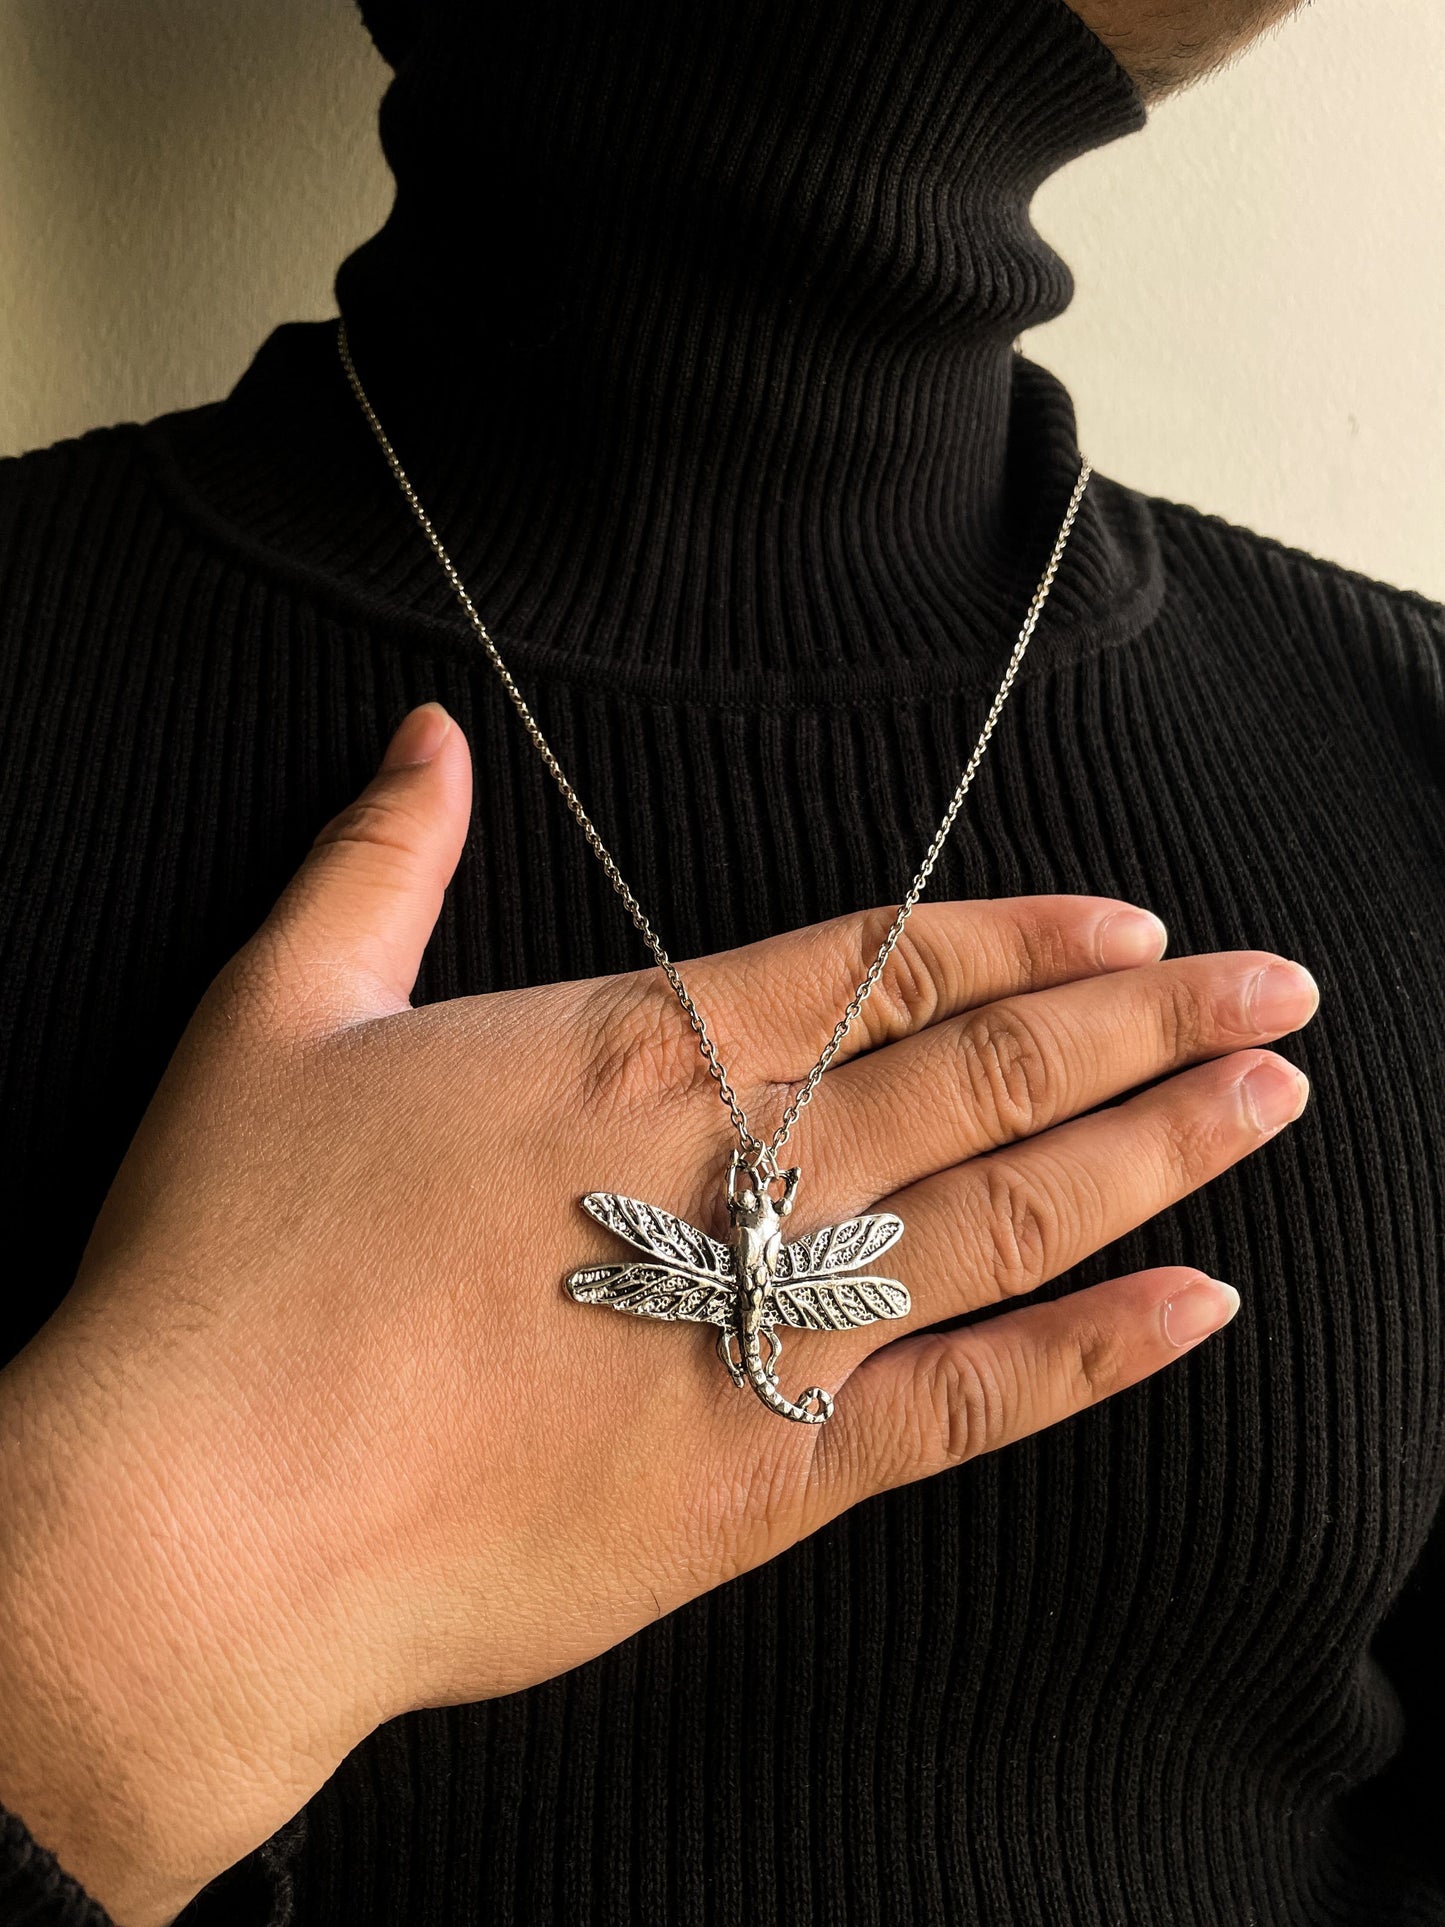 Big 3D Silver Dragonfly Statement Pendant With Chain